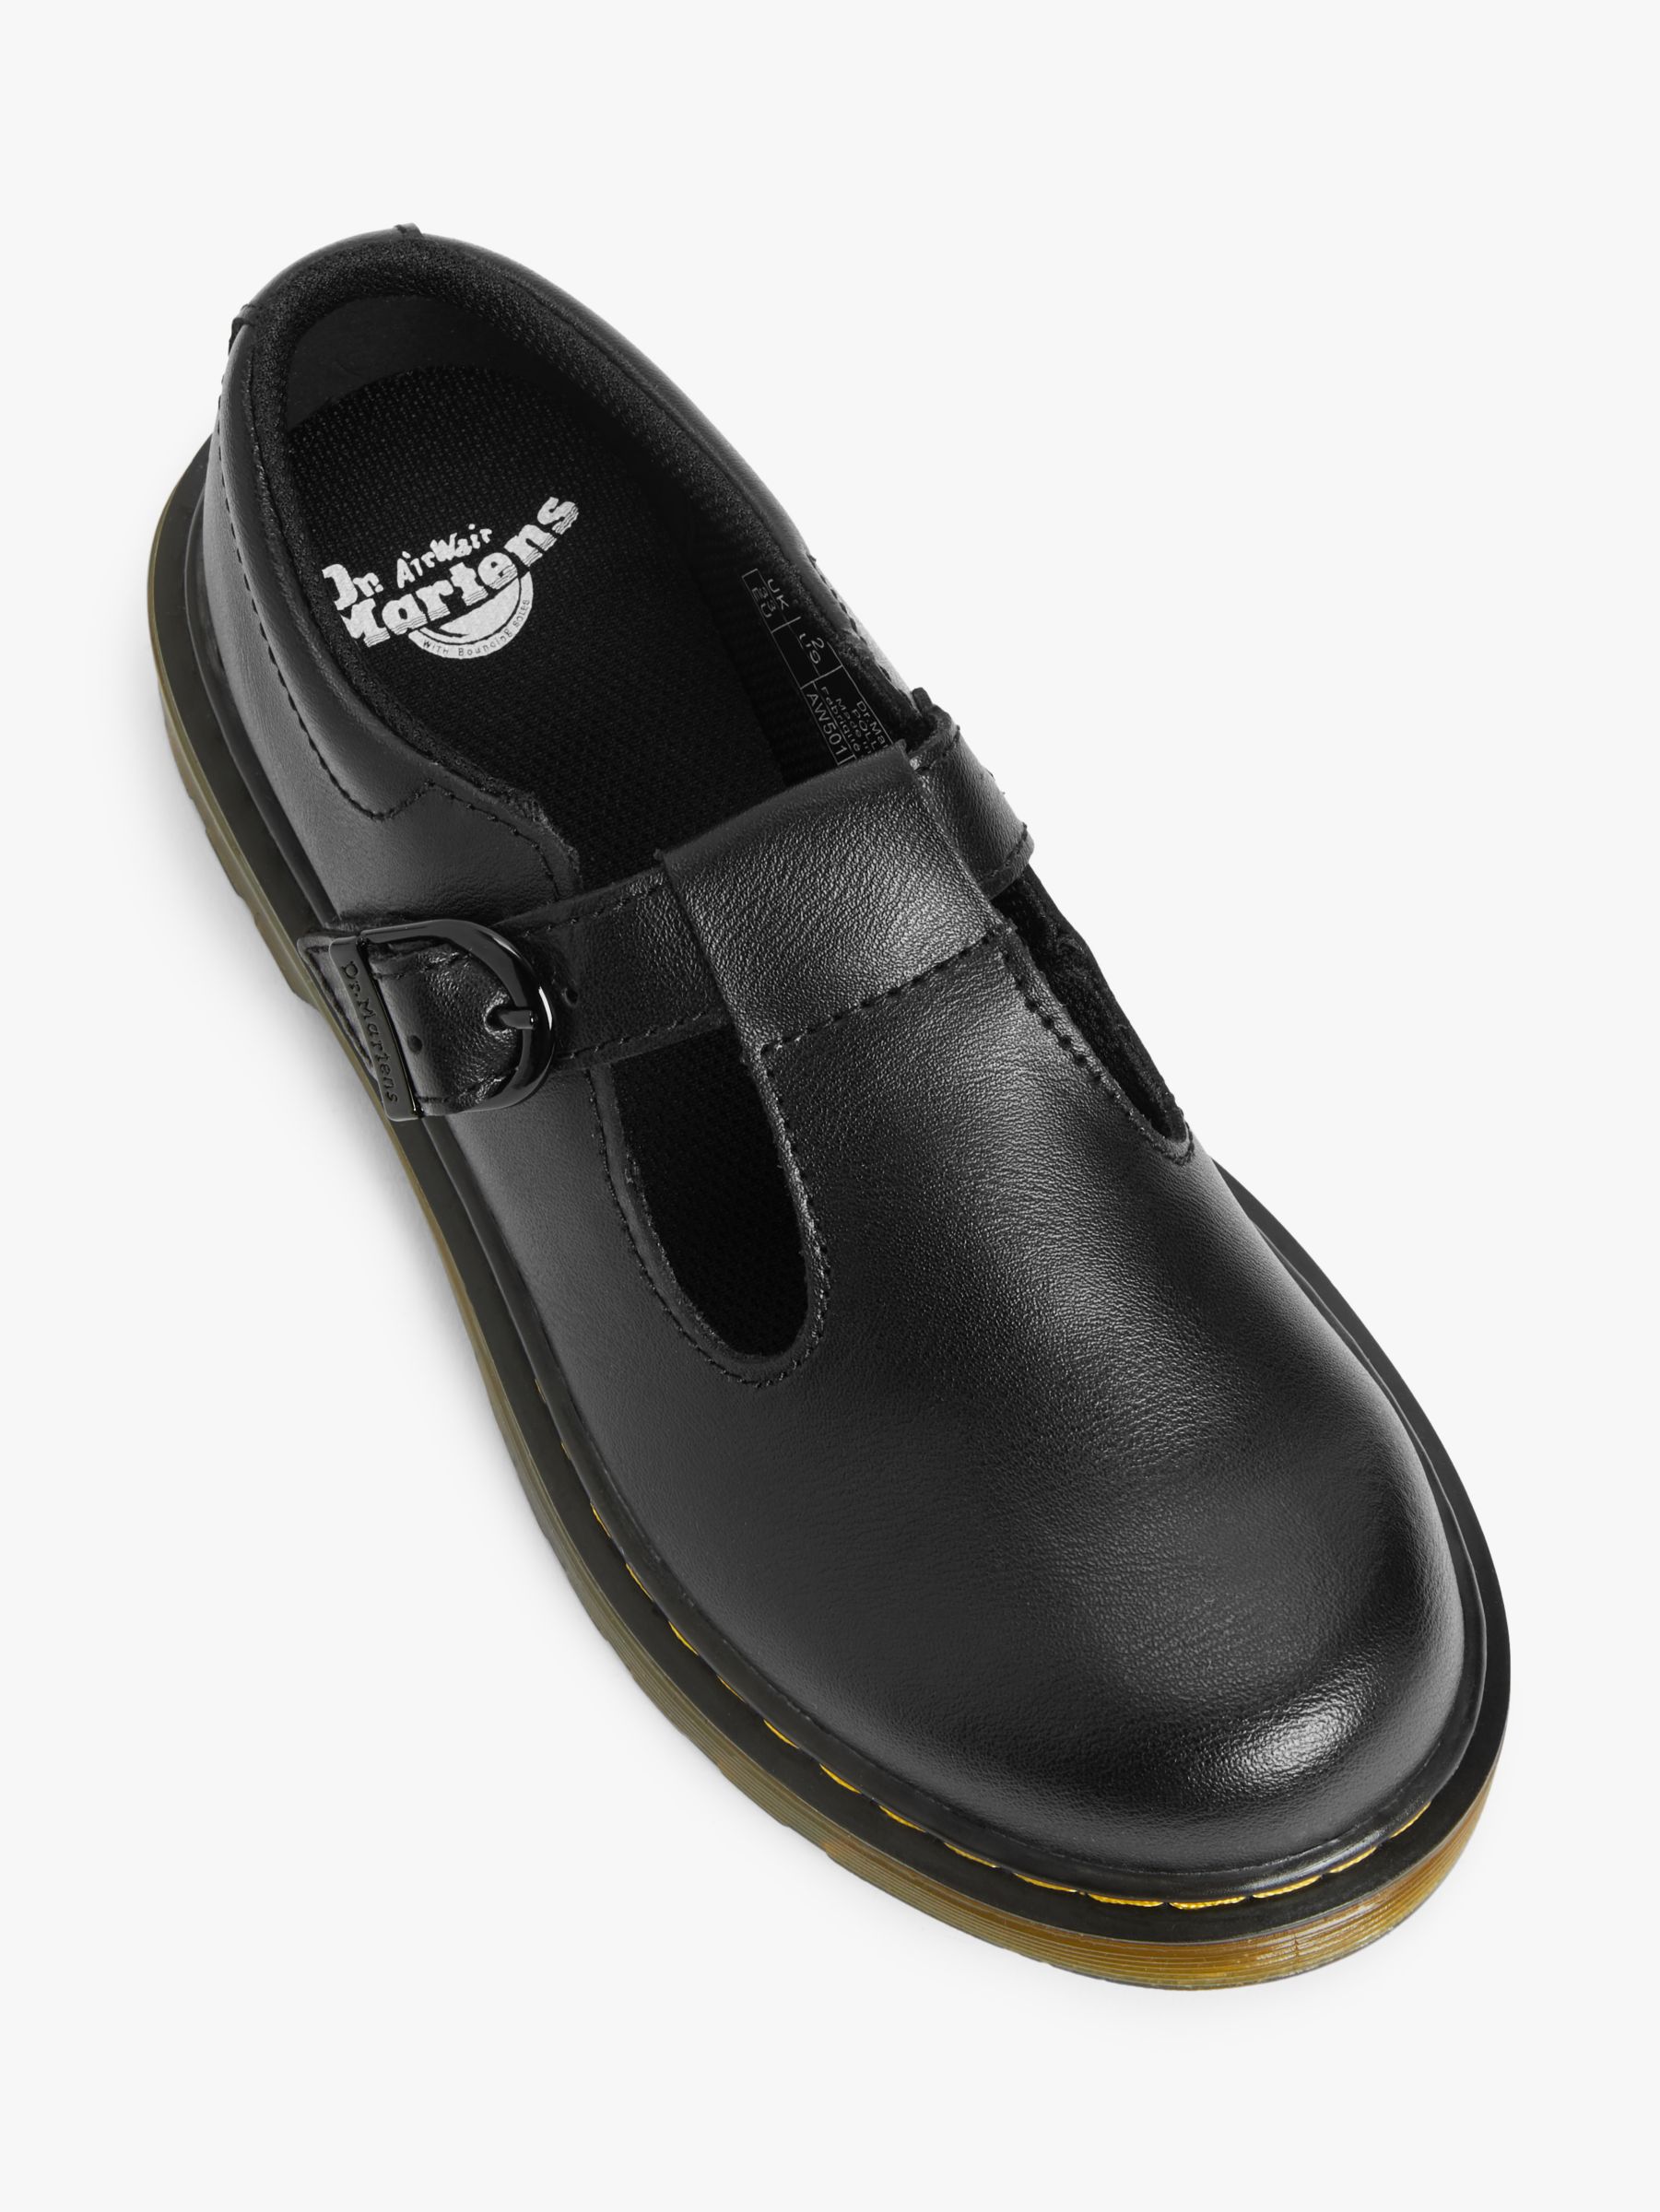 Dr Martens Children's Polley Mary Jane Leather Shoes, Black Smooth